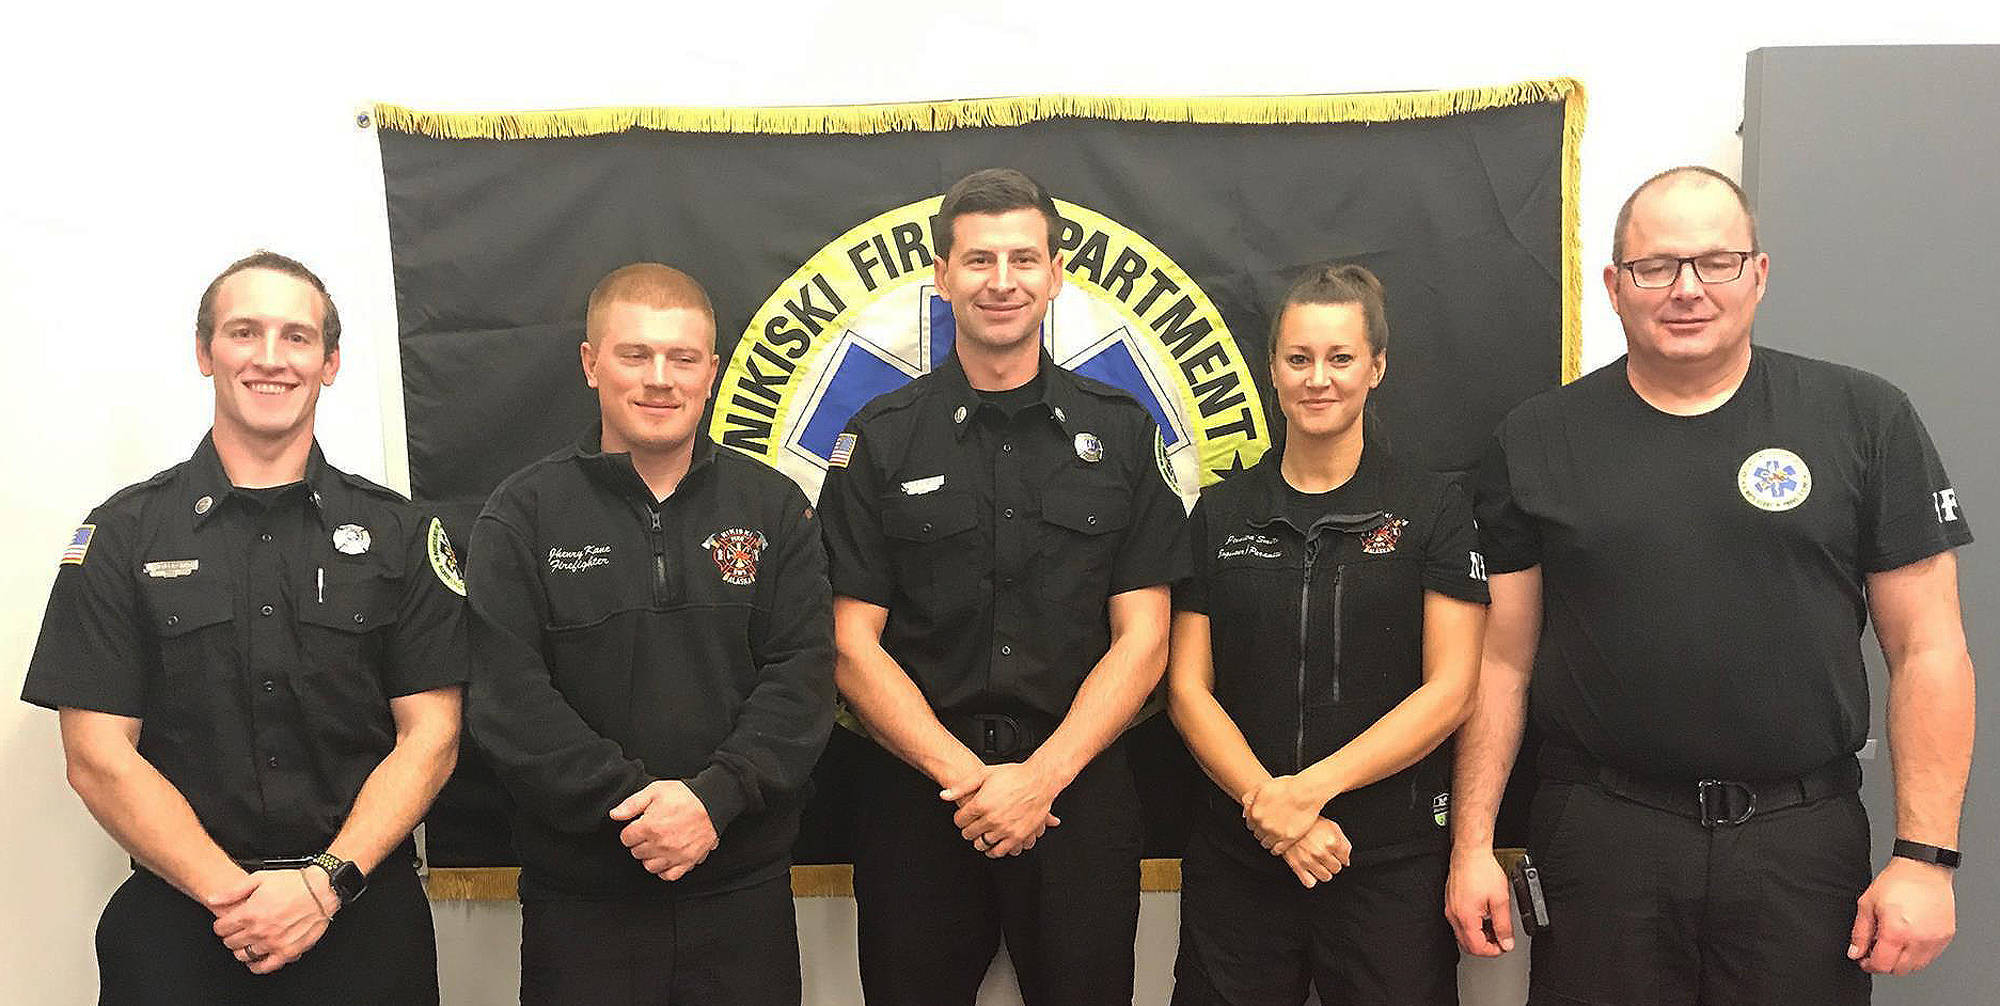 Levi Doss (middle) stands with his Nikiski Fire Department co-workers (from left to right) Ty Smith, Jhenry Kane, Jessica Smith and Barry Wheeler in 2017. (Photo provided by Levi Doss)